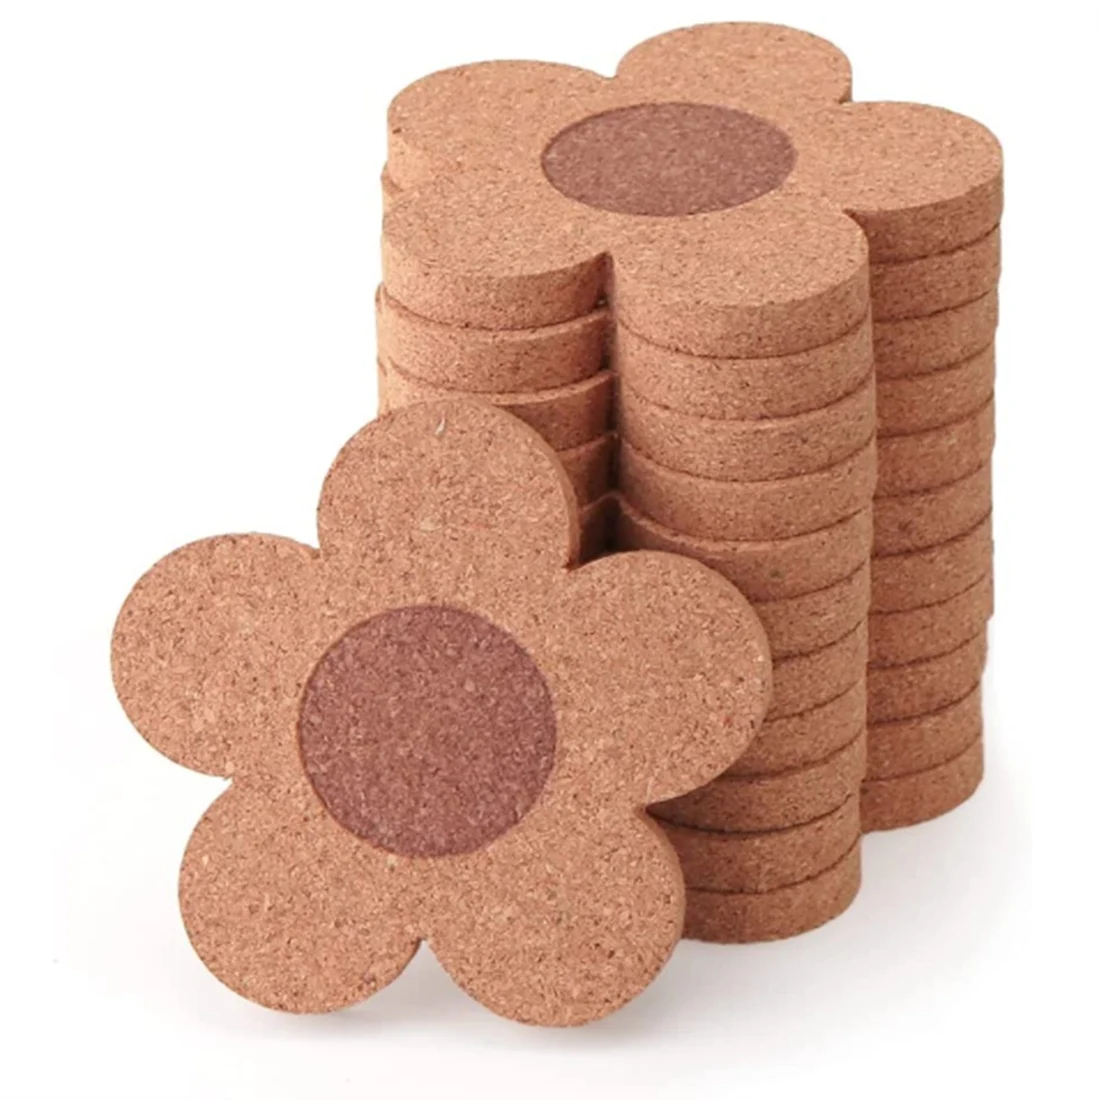 

12PCS Cute Coasters for Drinks,Absorbent&Reusable Coaster Set 4Inch Cork Flower Shape Coasters for Coffee,Tea Cup Mat